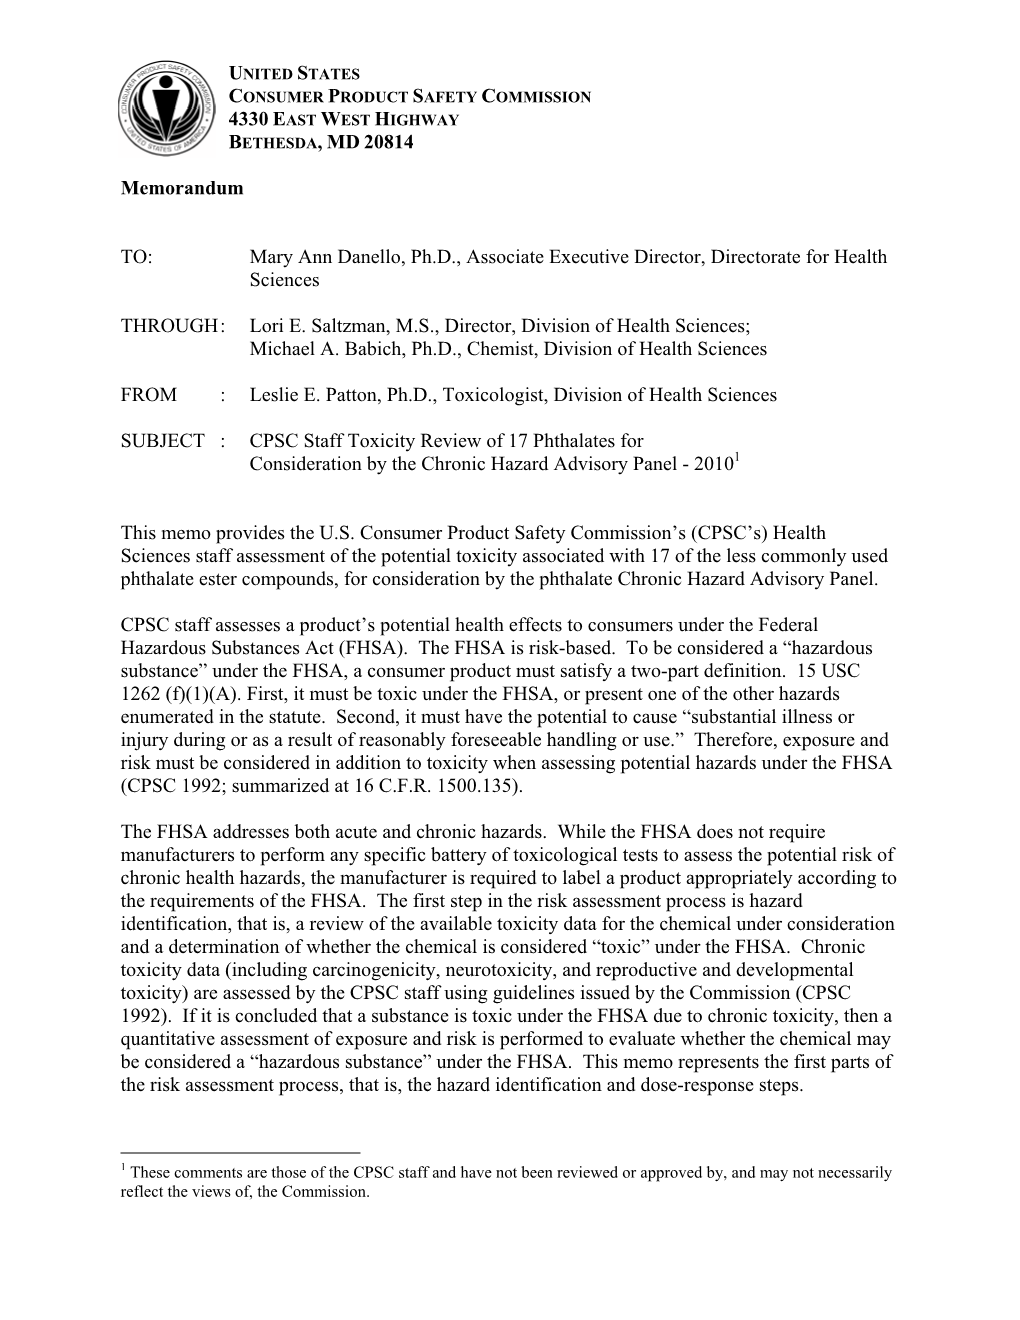 CPSC Staff Toxicity Review of 17 Phthalates for Consideration by the Chronic Hazard Advisory Panel - 20101